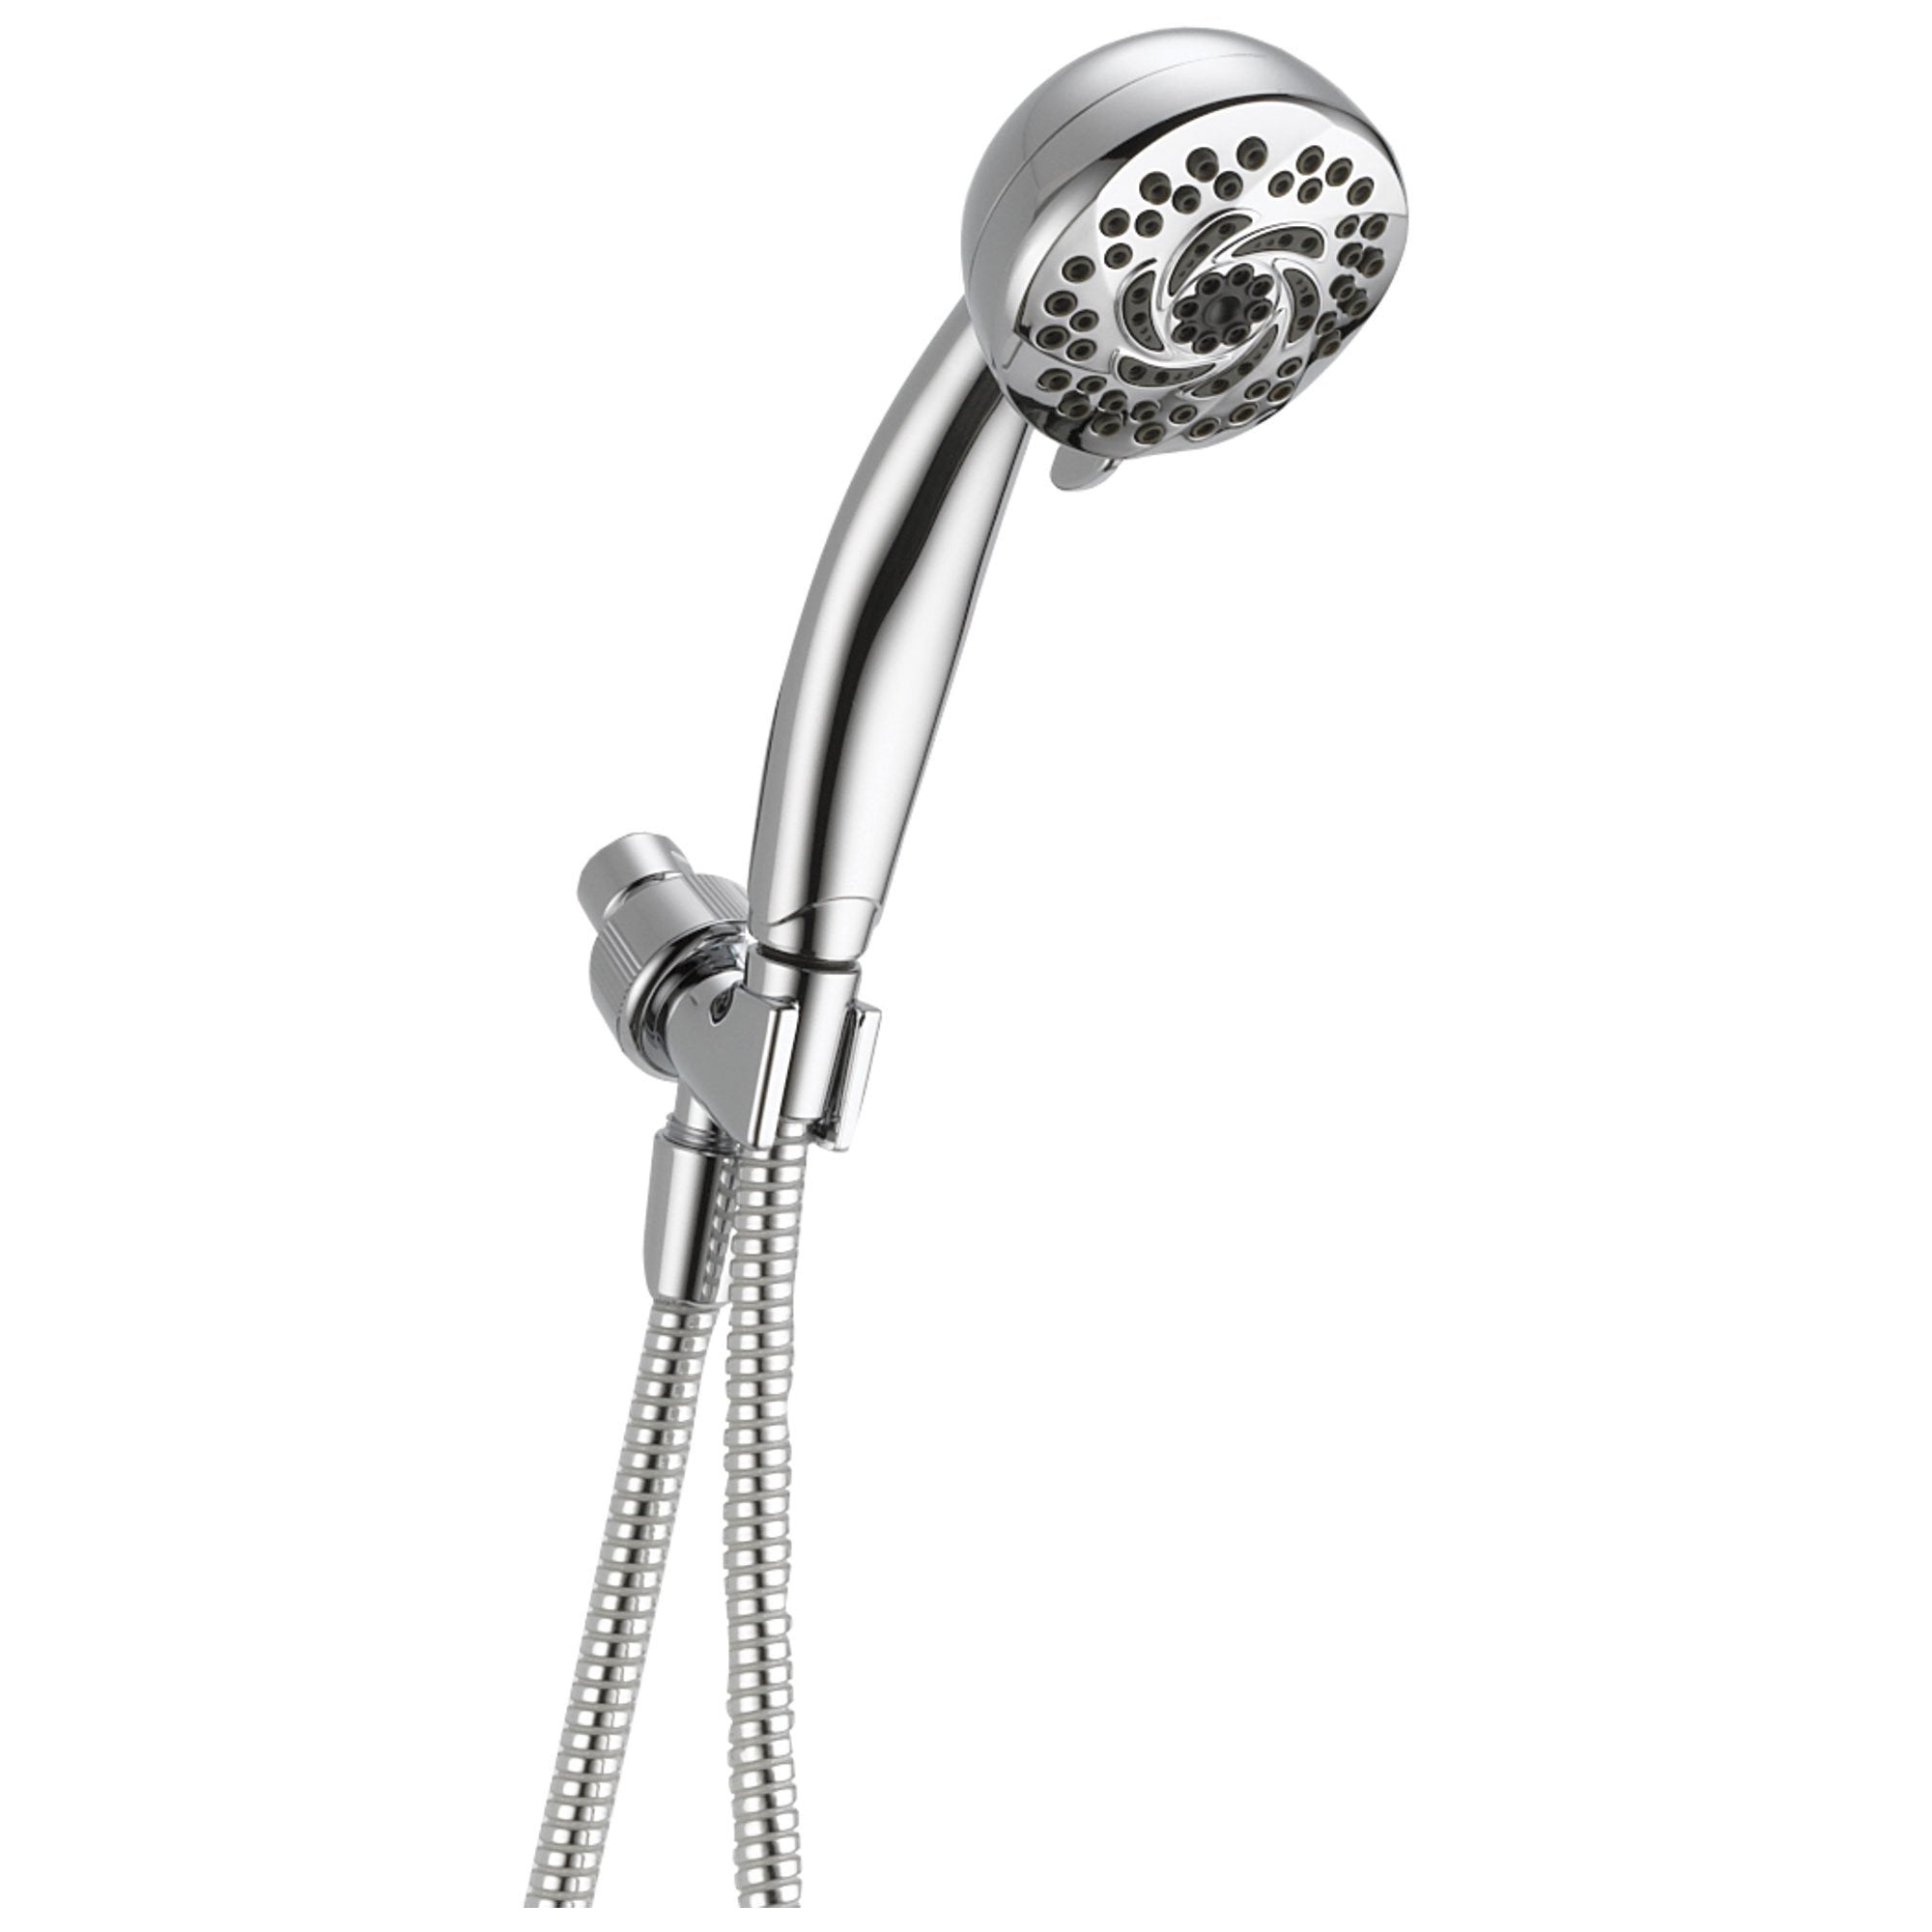 Delta Universal Showering Components Collection Chrome Finish 5-Setting Shower Mount Hand Shower Spray Head with Hose 737454